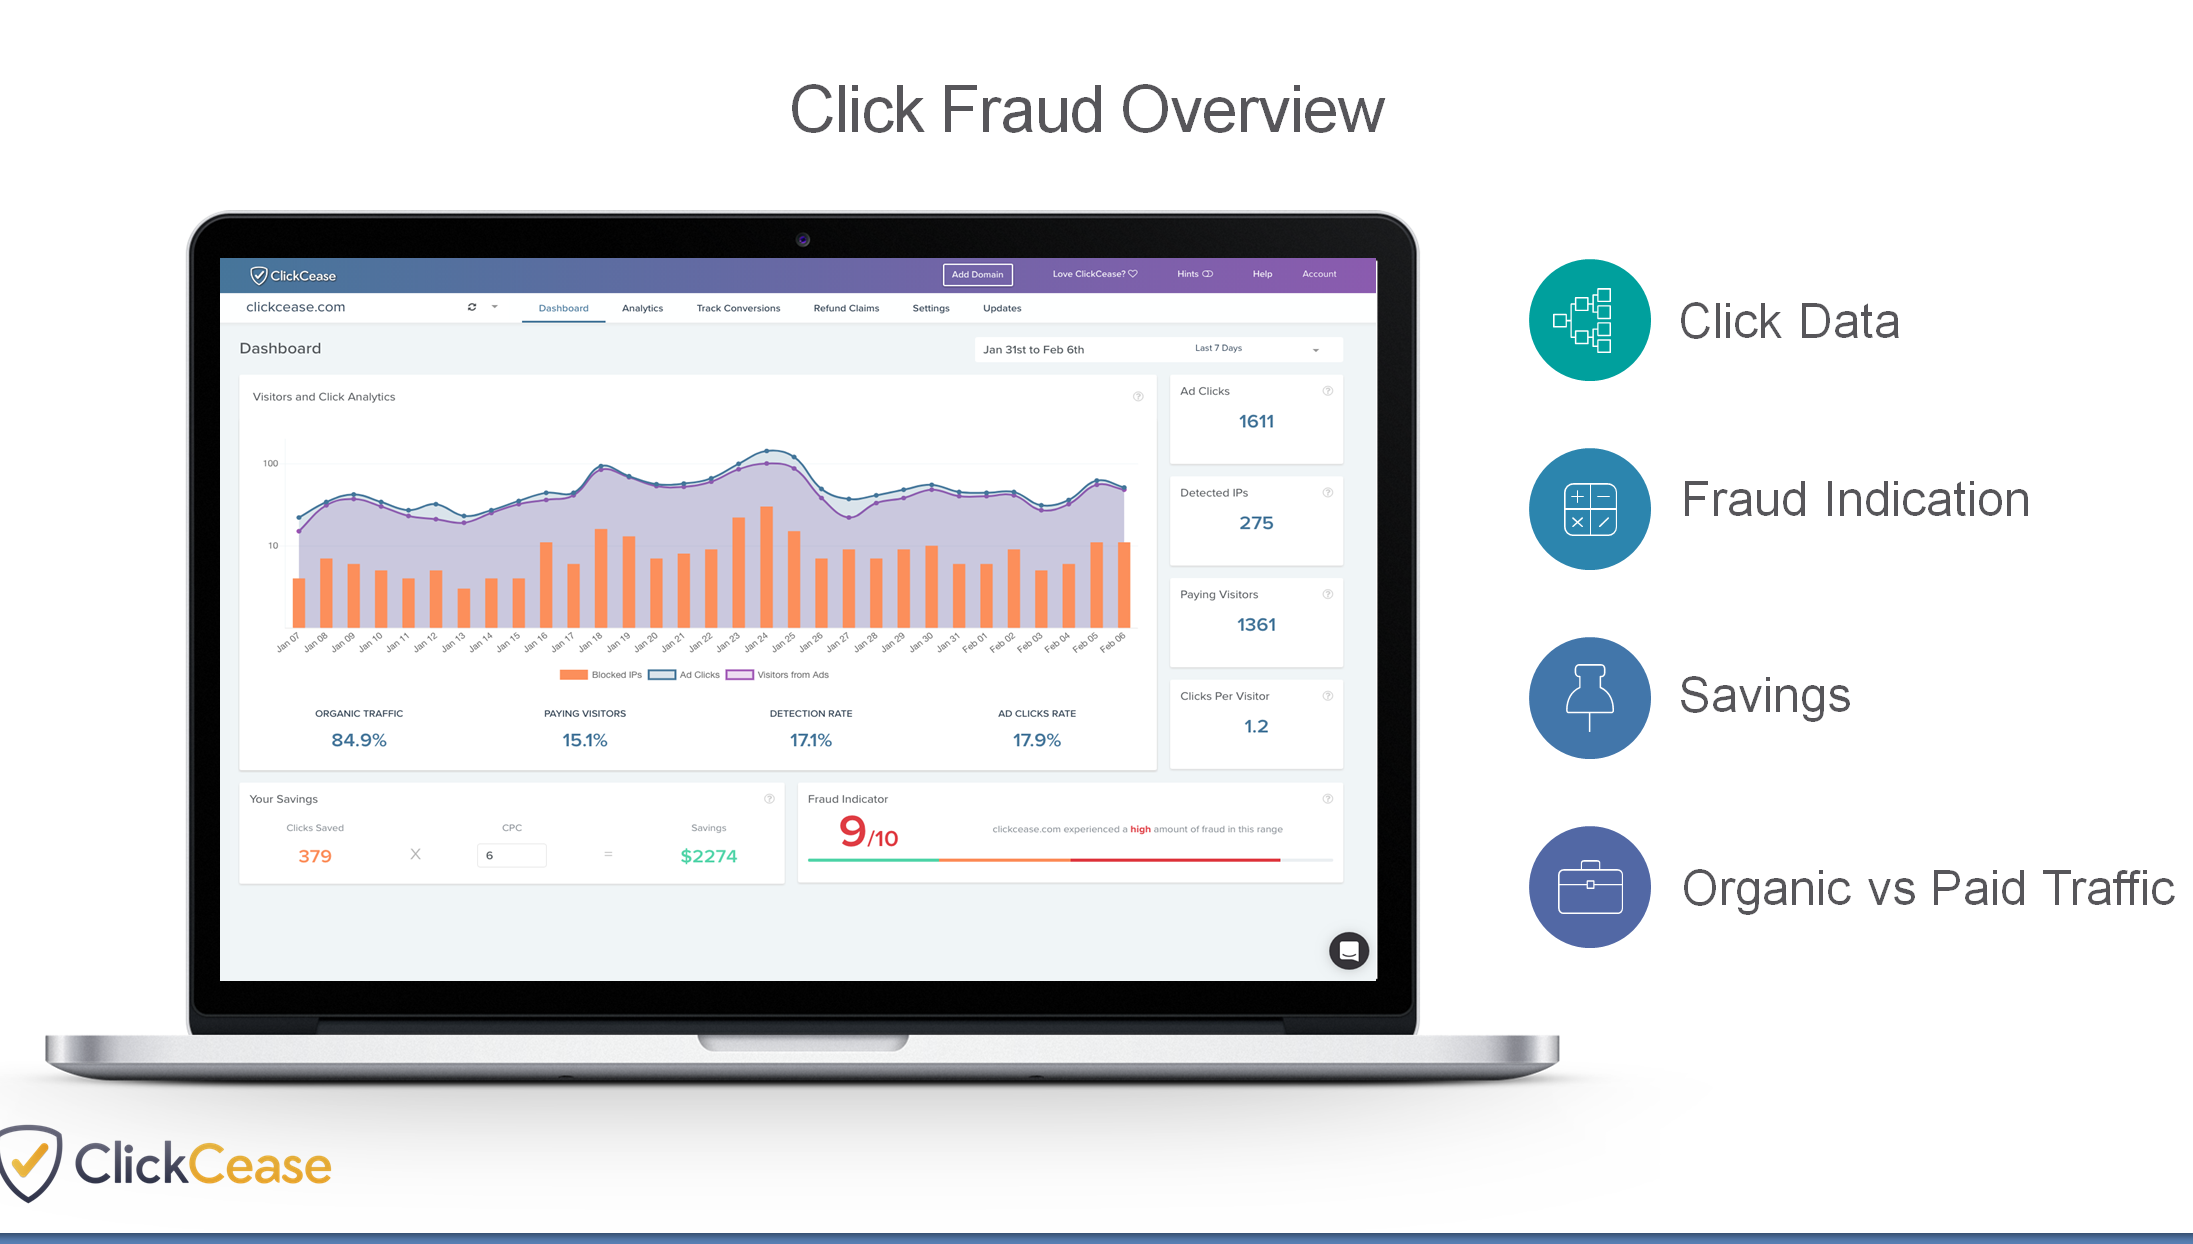 Best Click fraud soiftwares in the market